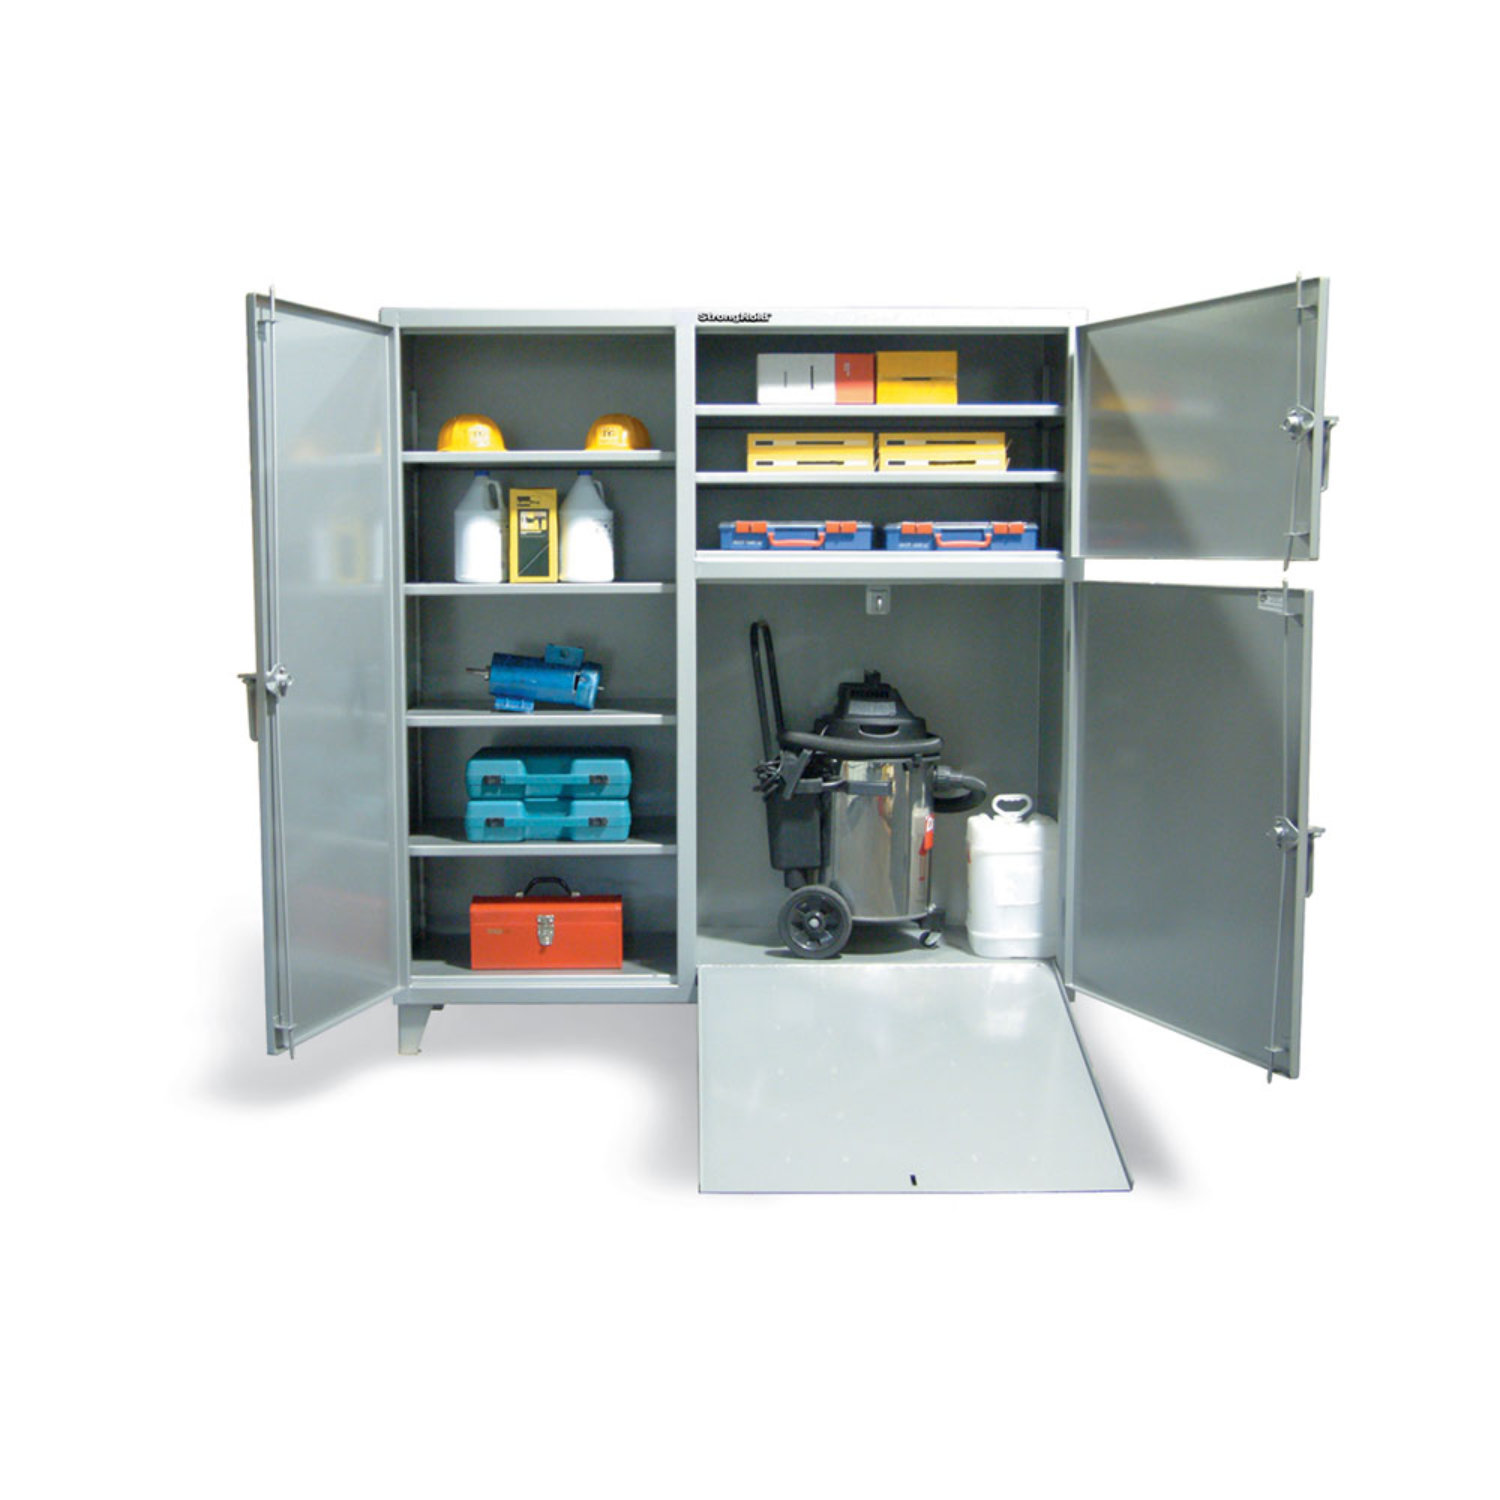 https://madeinusatools.com/wp-content/uploads/2020/06/janitorial-storage-cabinet-with-vac-door-and-ramp.jpg